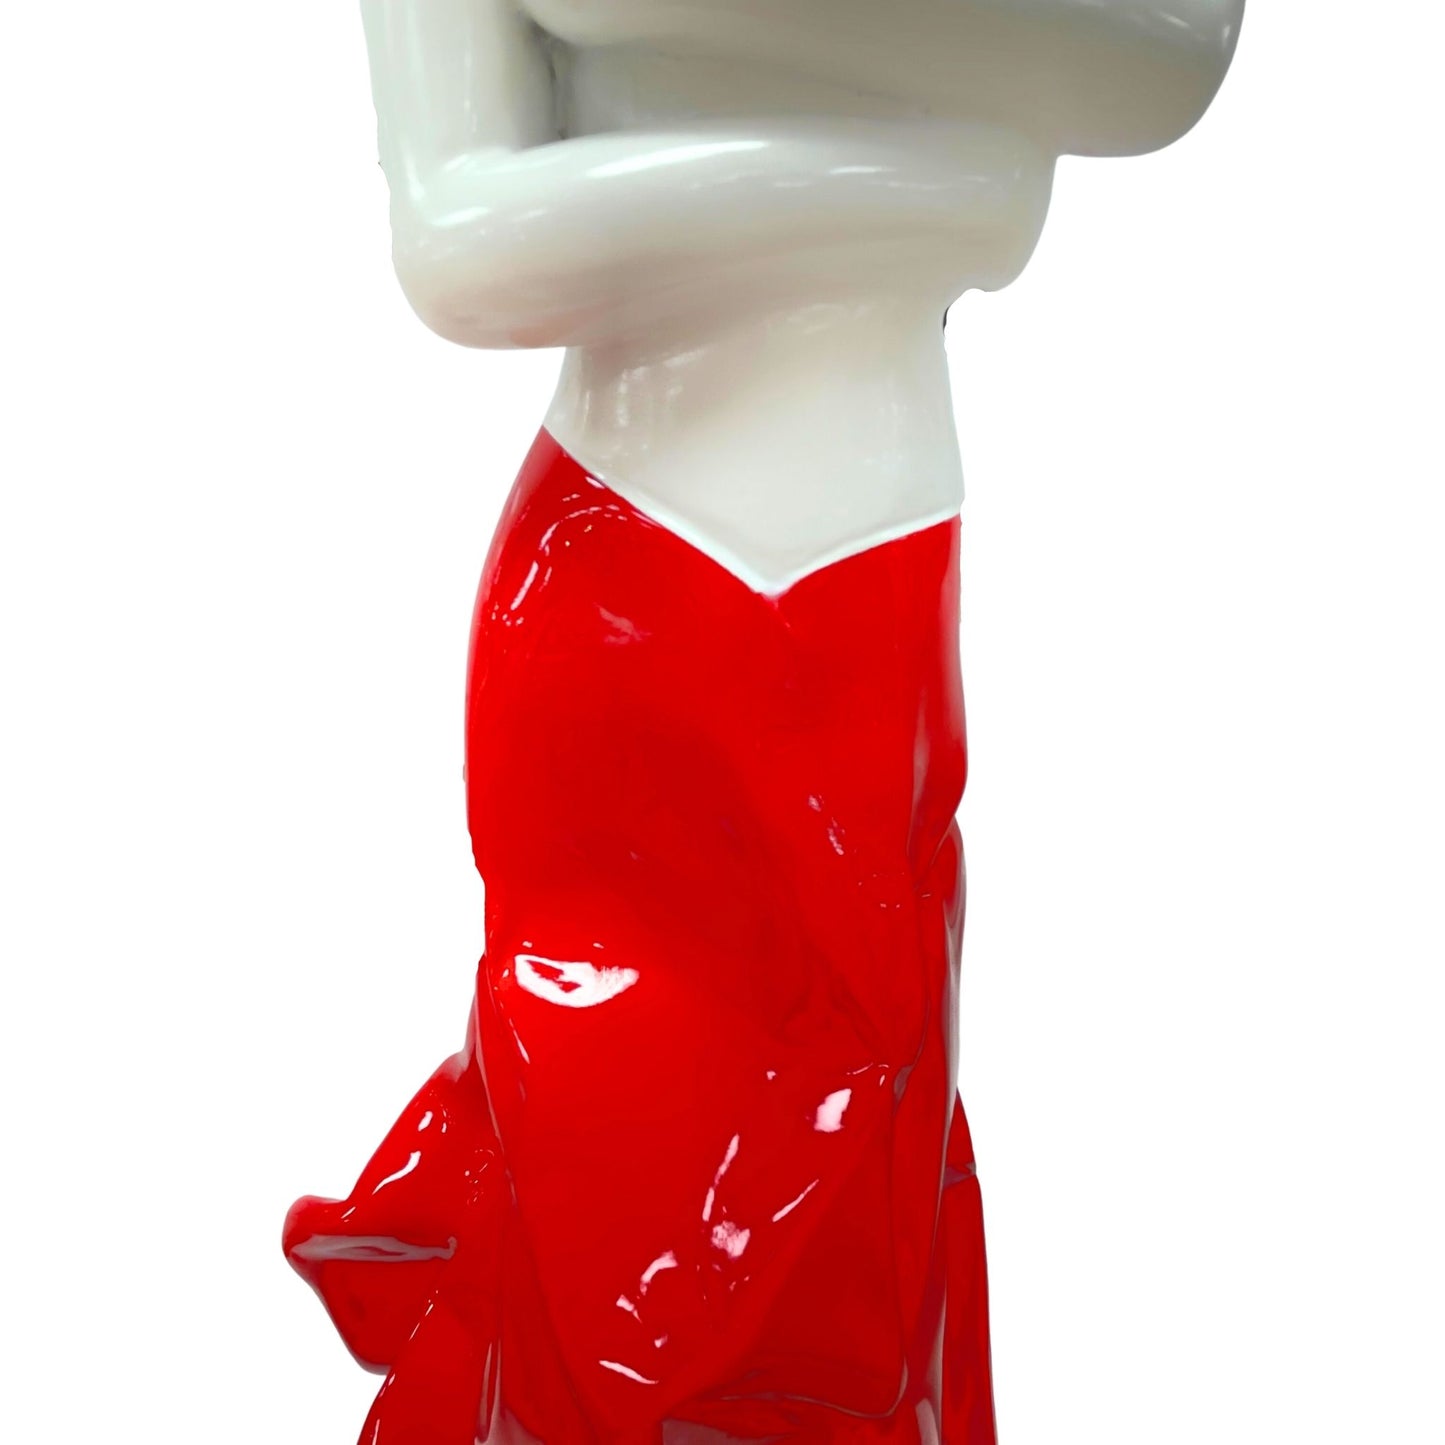 Woman with Red Skirt Statue